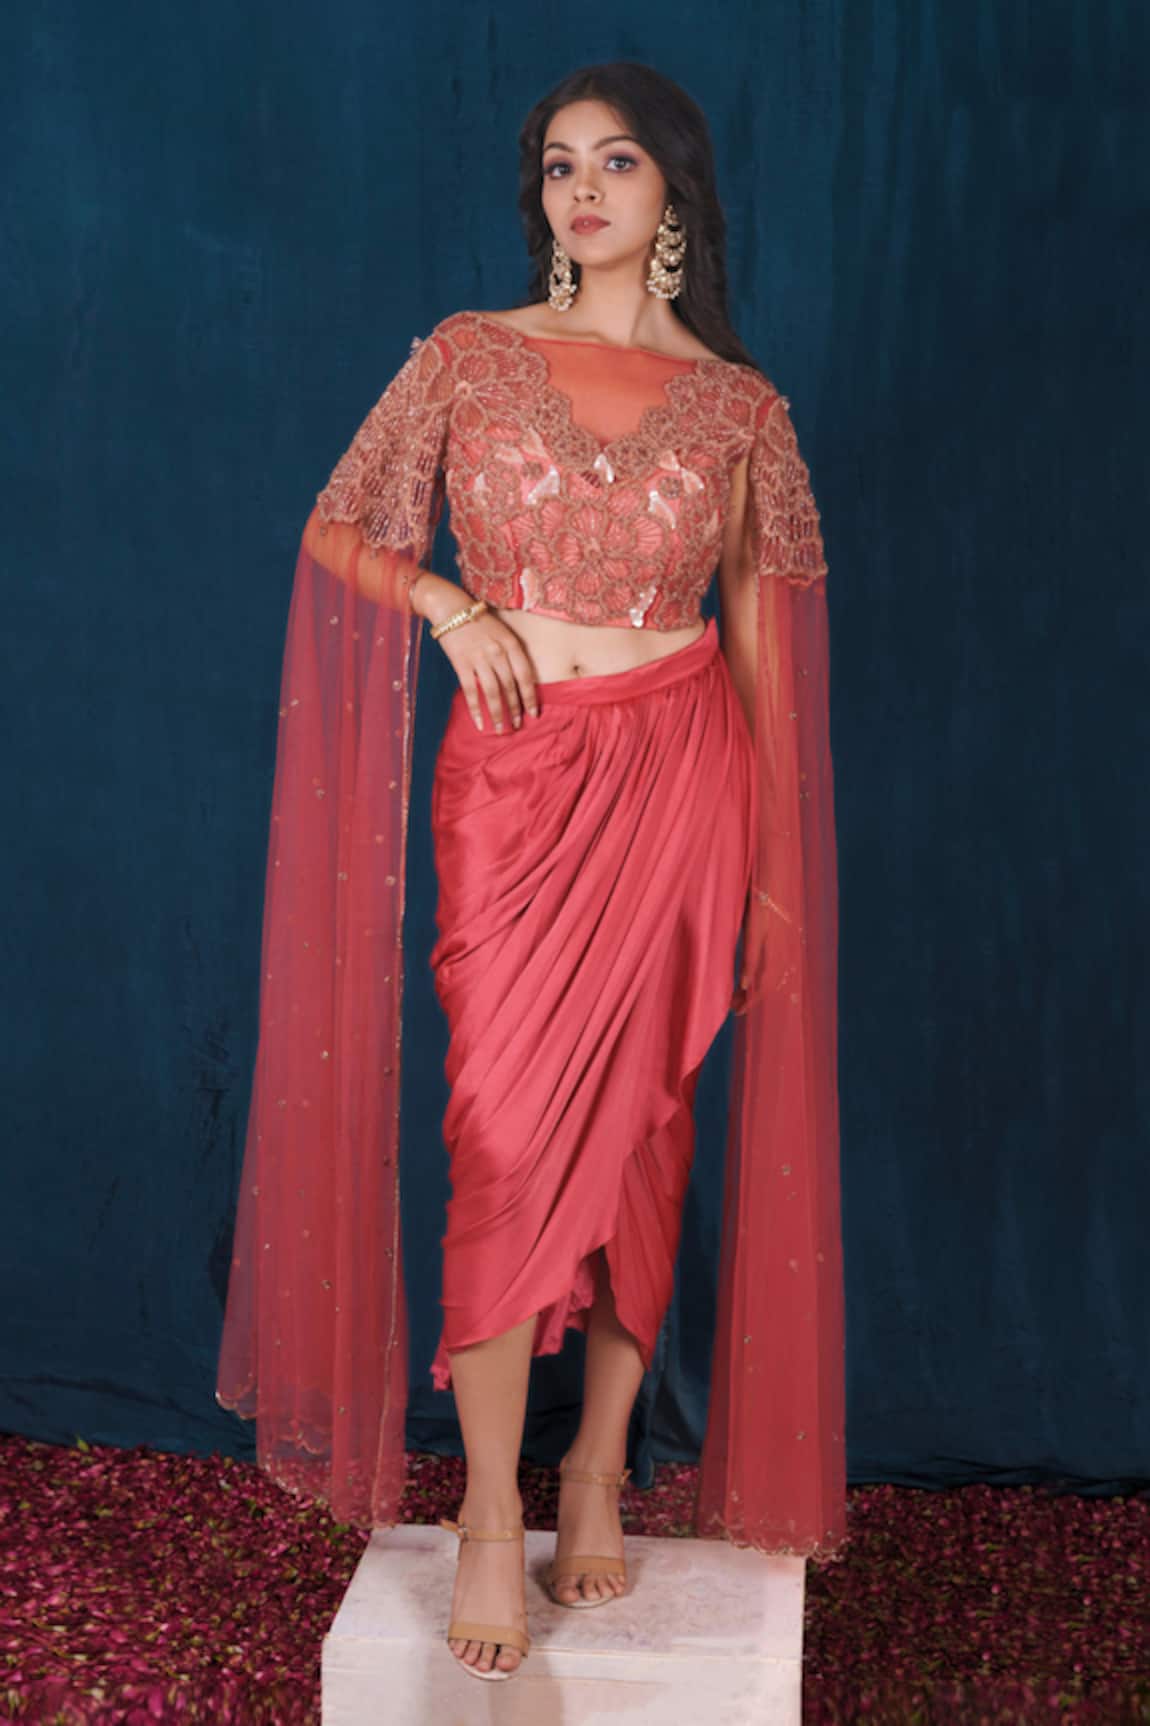 SAUBHAGYA Floral Embroidered Blouse With Draped Skirt